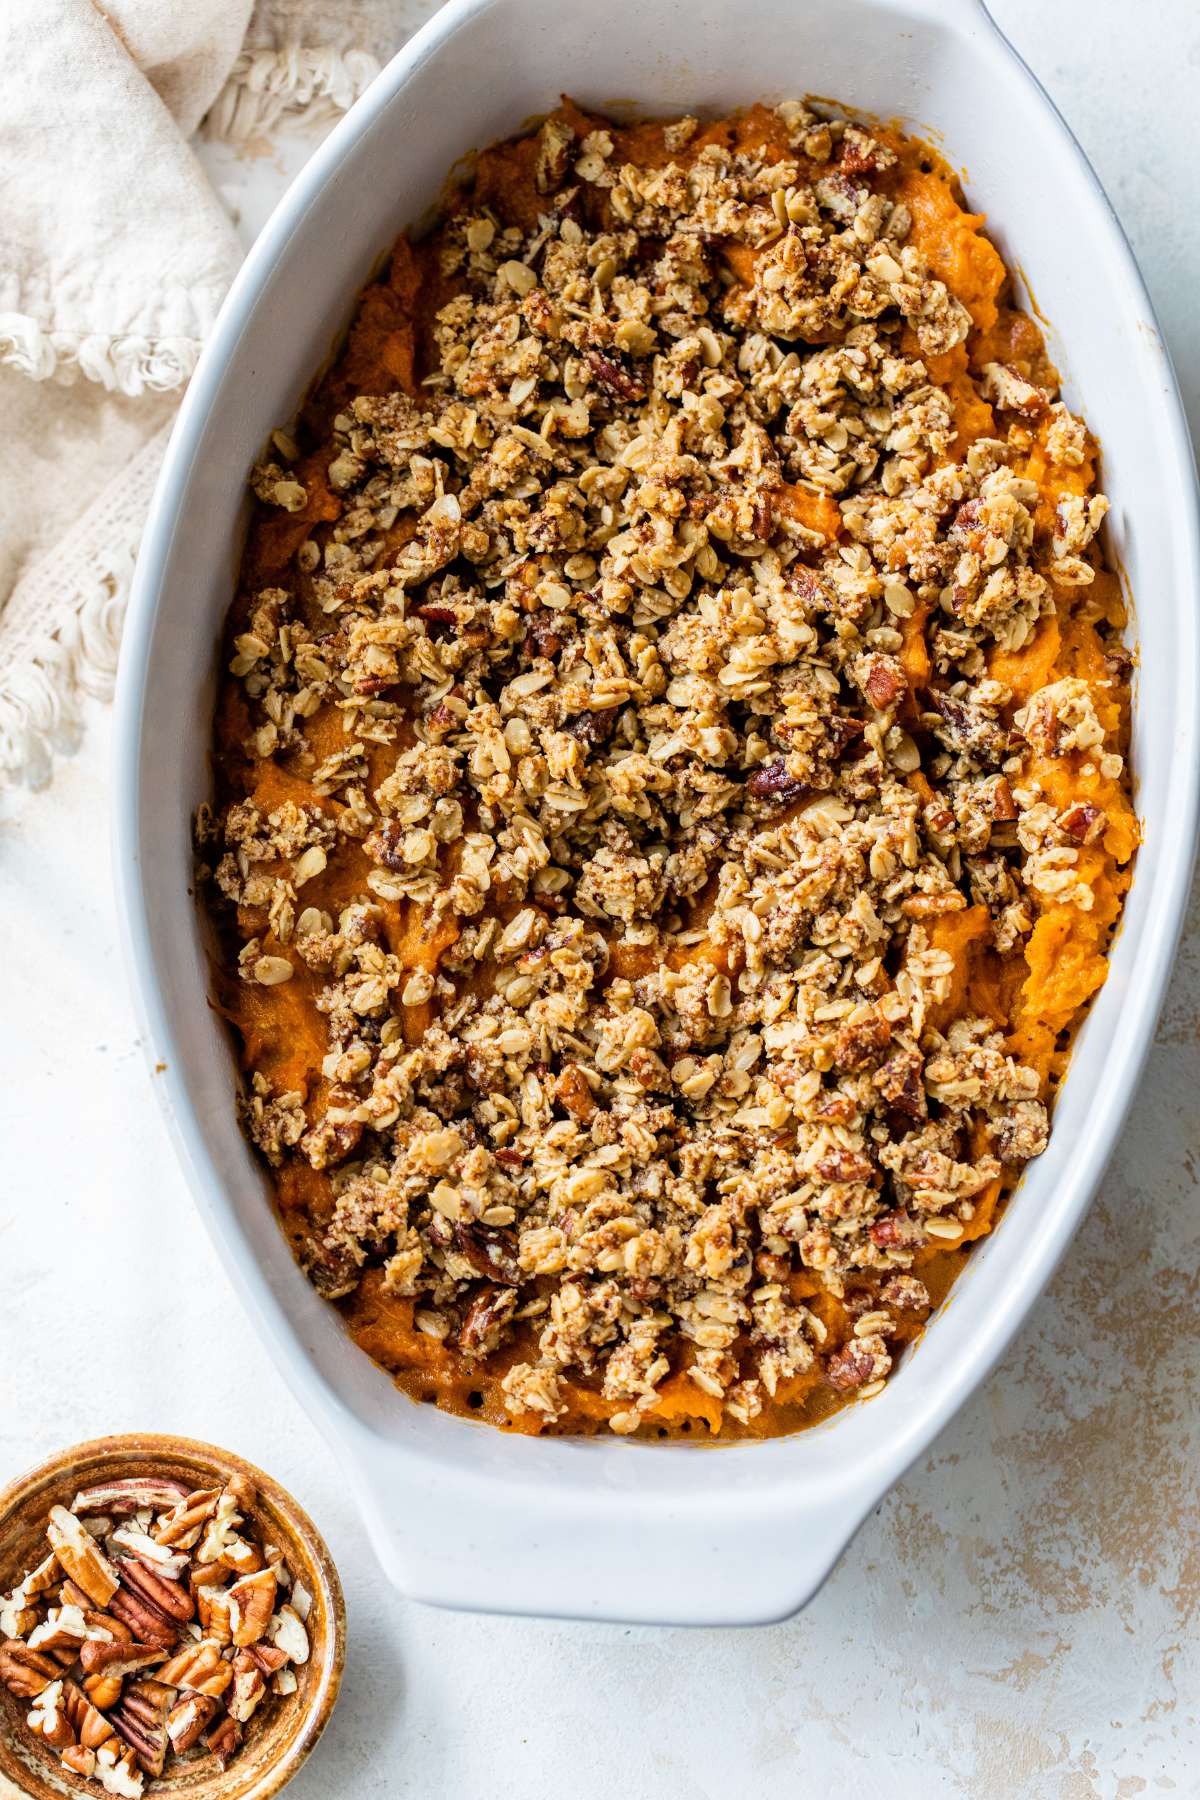 Topping sprinkled over sweet potato casserole.